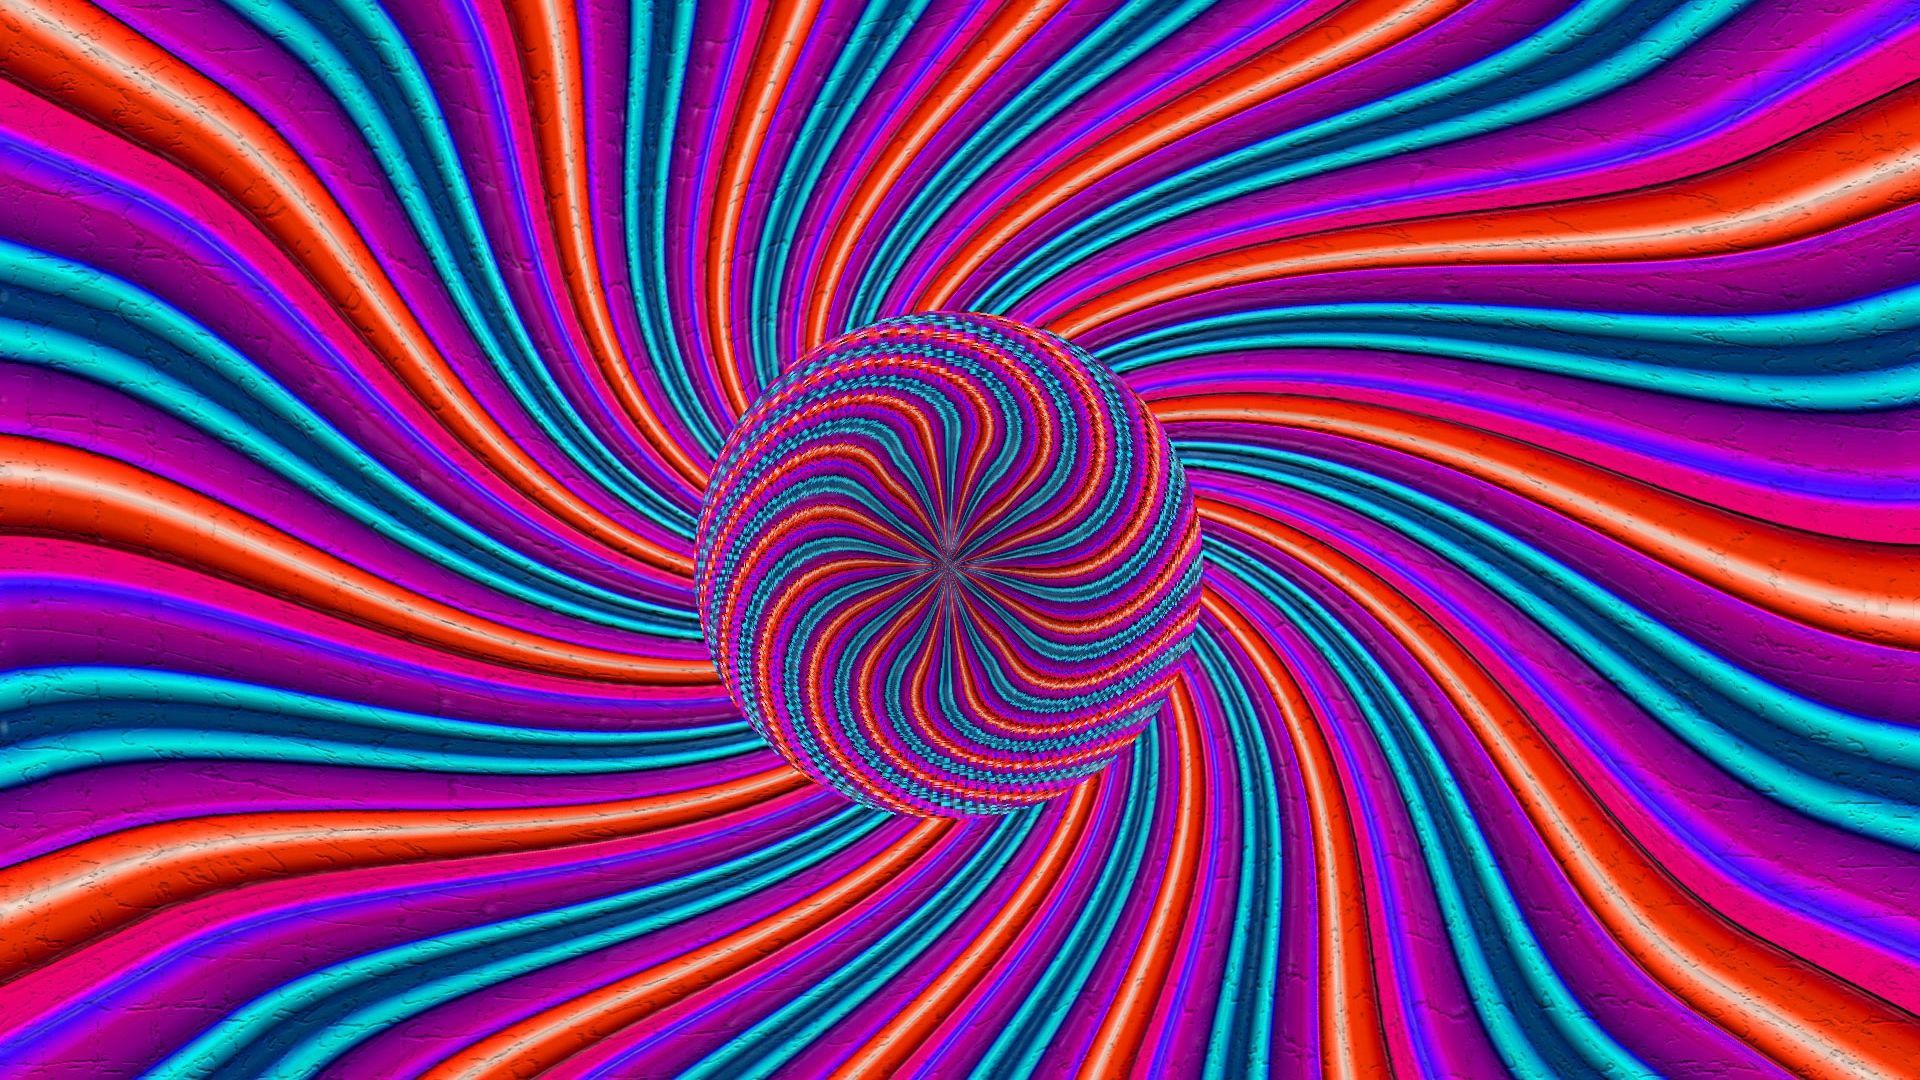 Download Wallpaper 1920x1080 Abstract, Circles, Lines, Colored ...